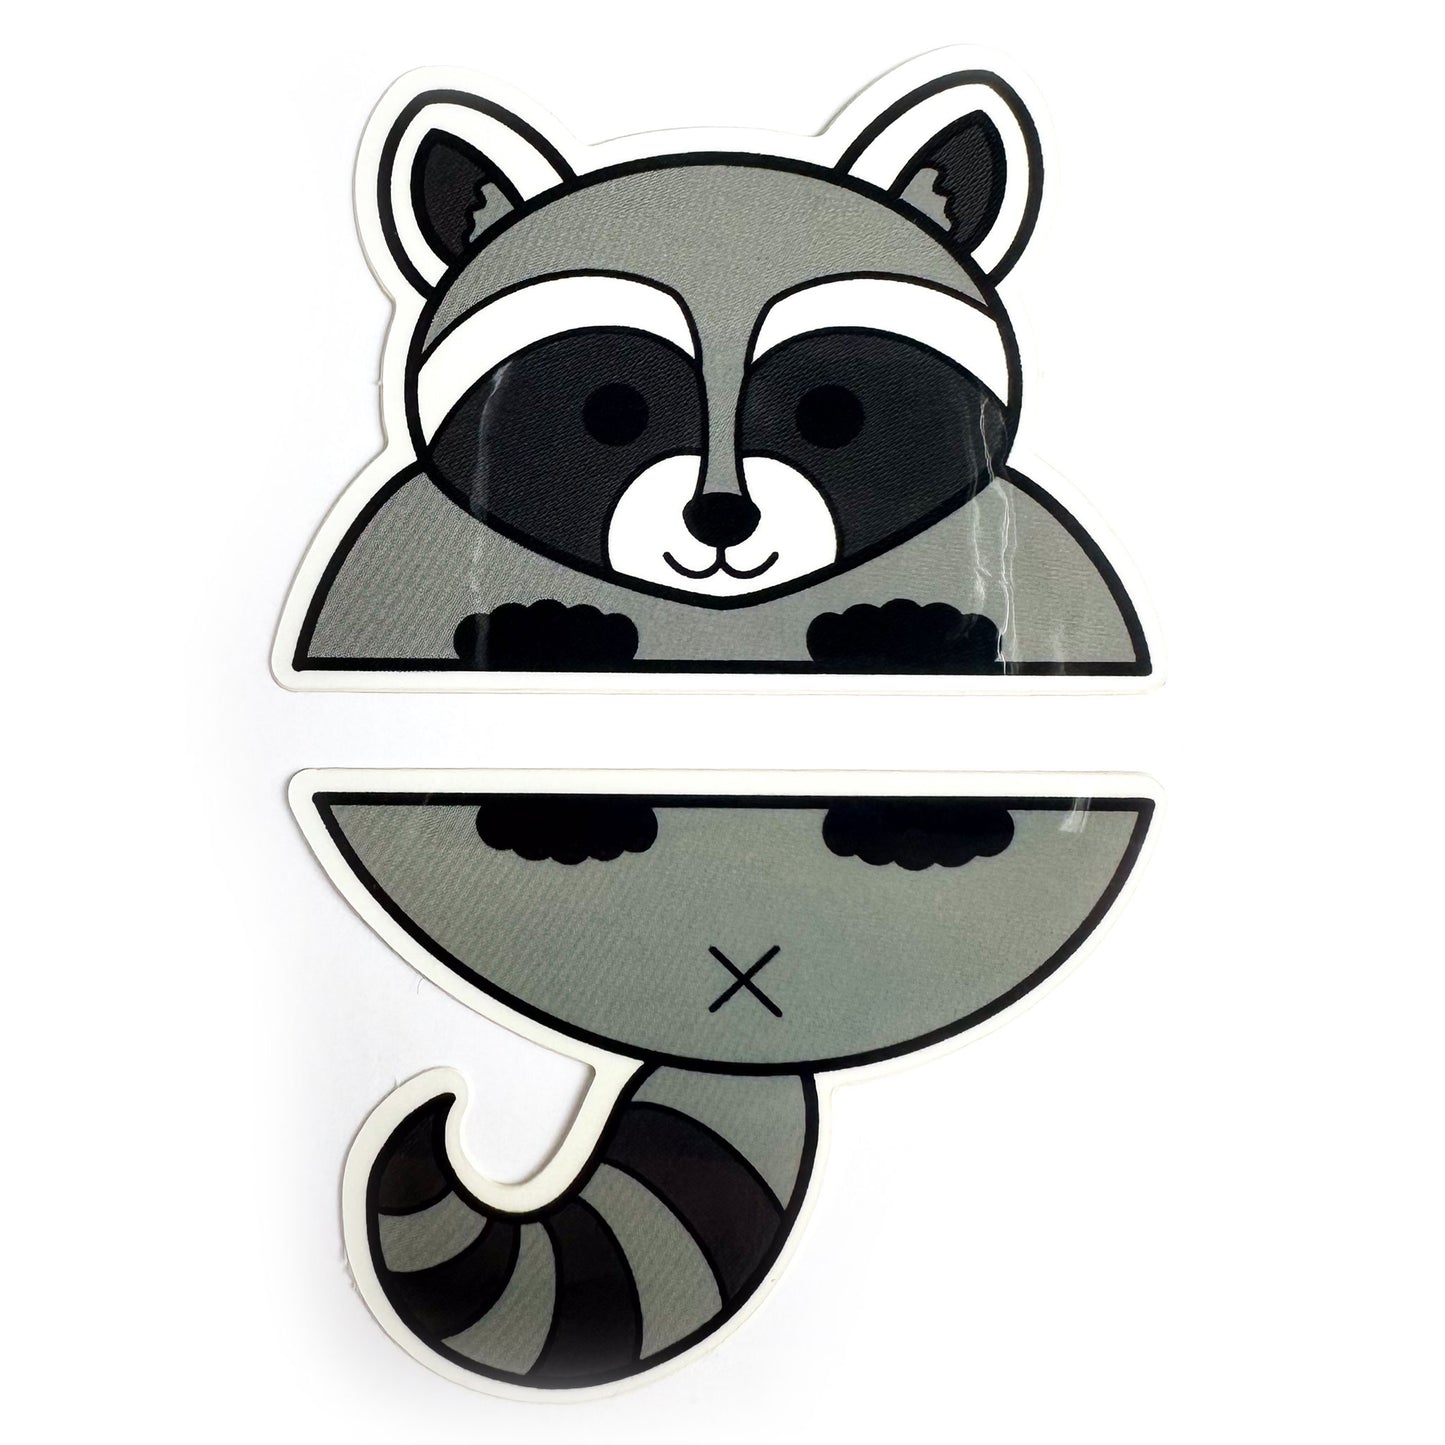 Two stickers that come together to form a cartoon illustration of a raccoon.